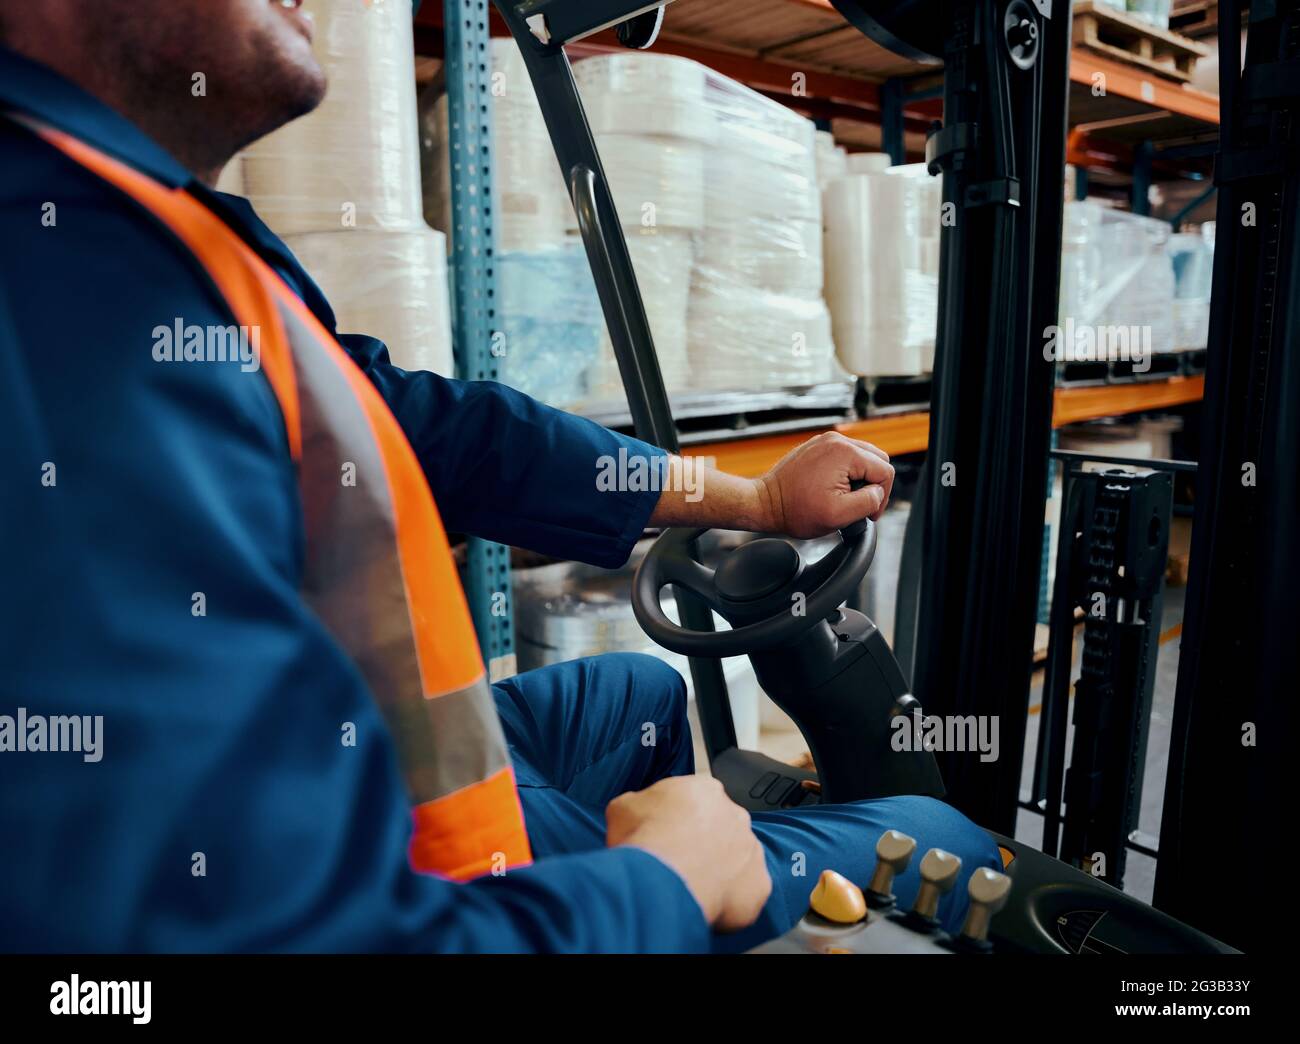 Close-up of a warehouse worker operating forklift truck Stock Photo